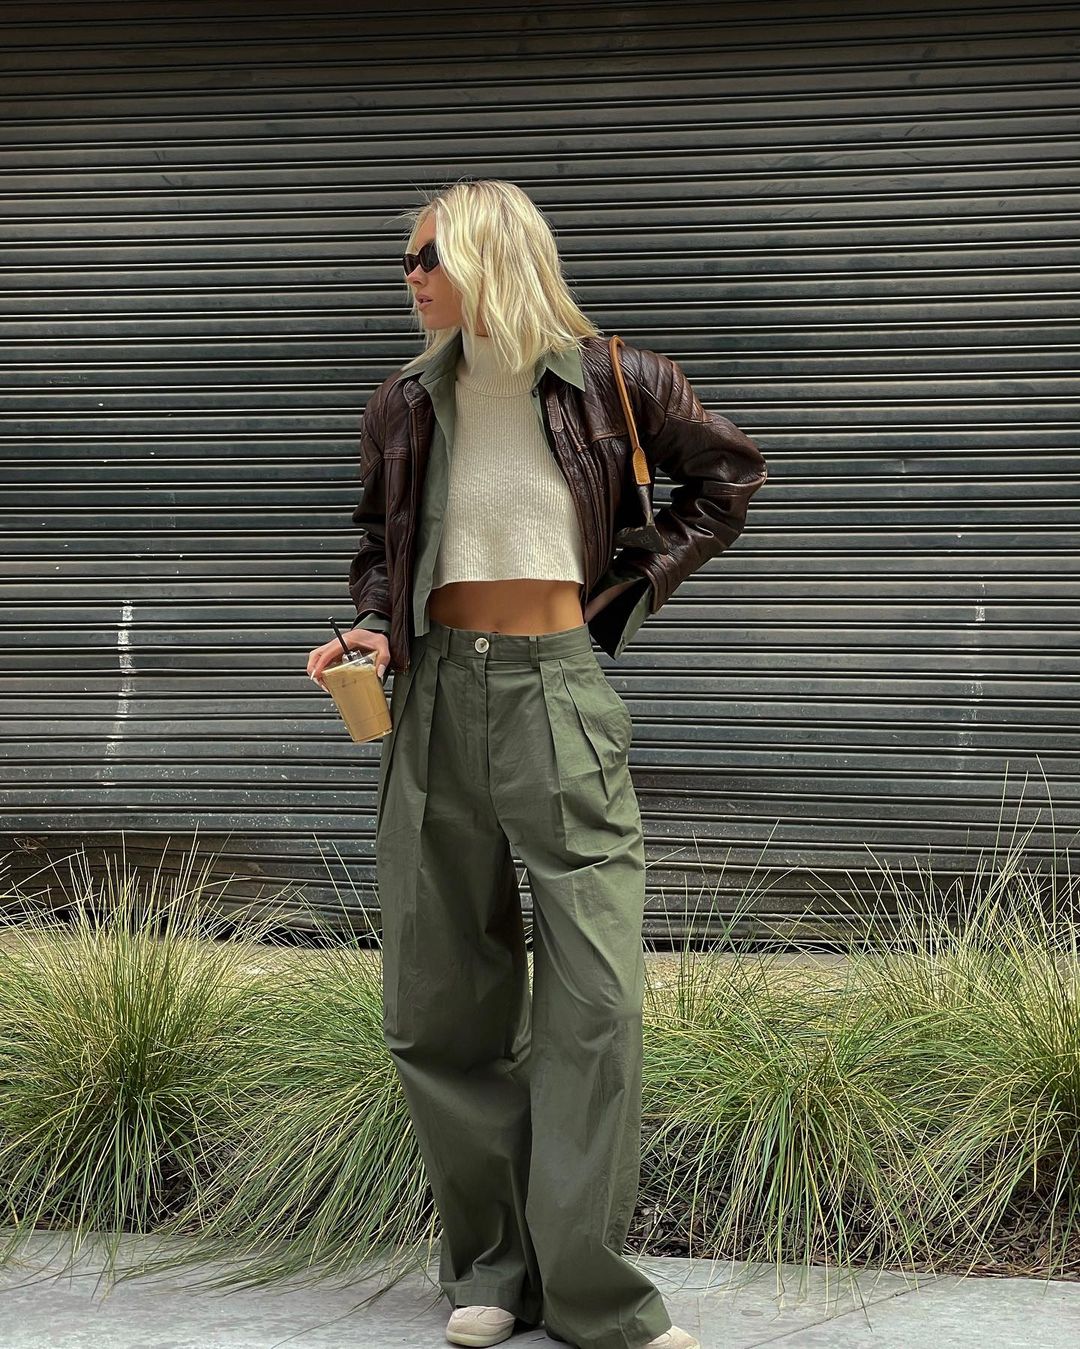 Channel Fall Vibes With The Olive Green Color Trend